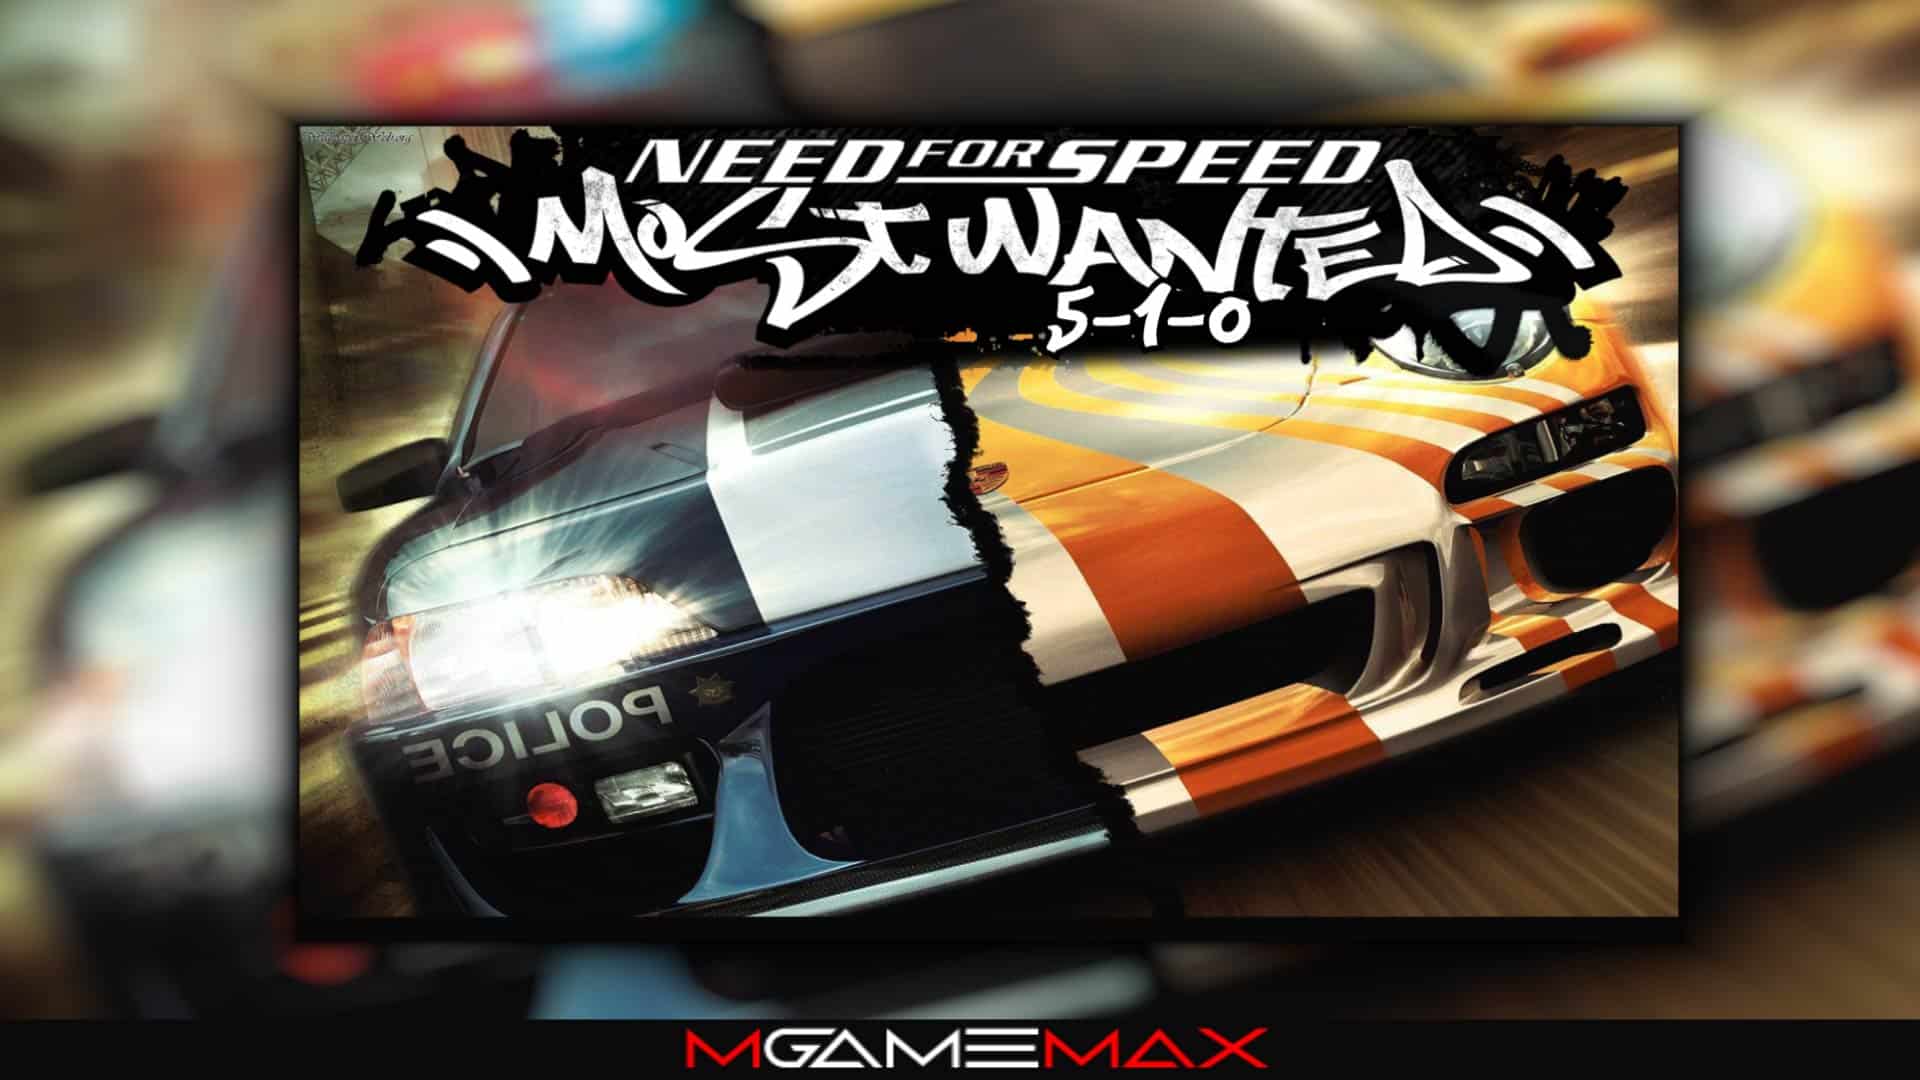 Need For Speed Most Wanted 5-1-0 PPSSPP ISO Highly Compressed Download